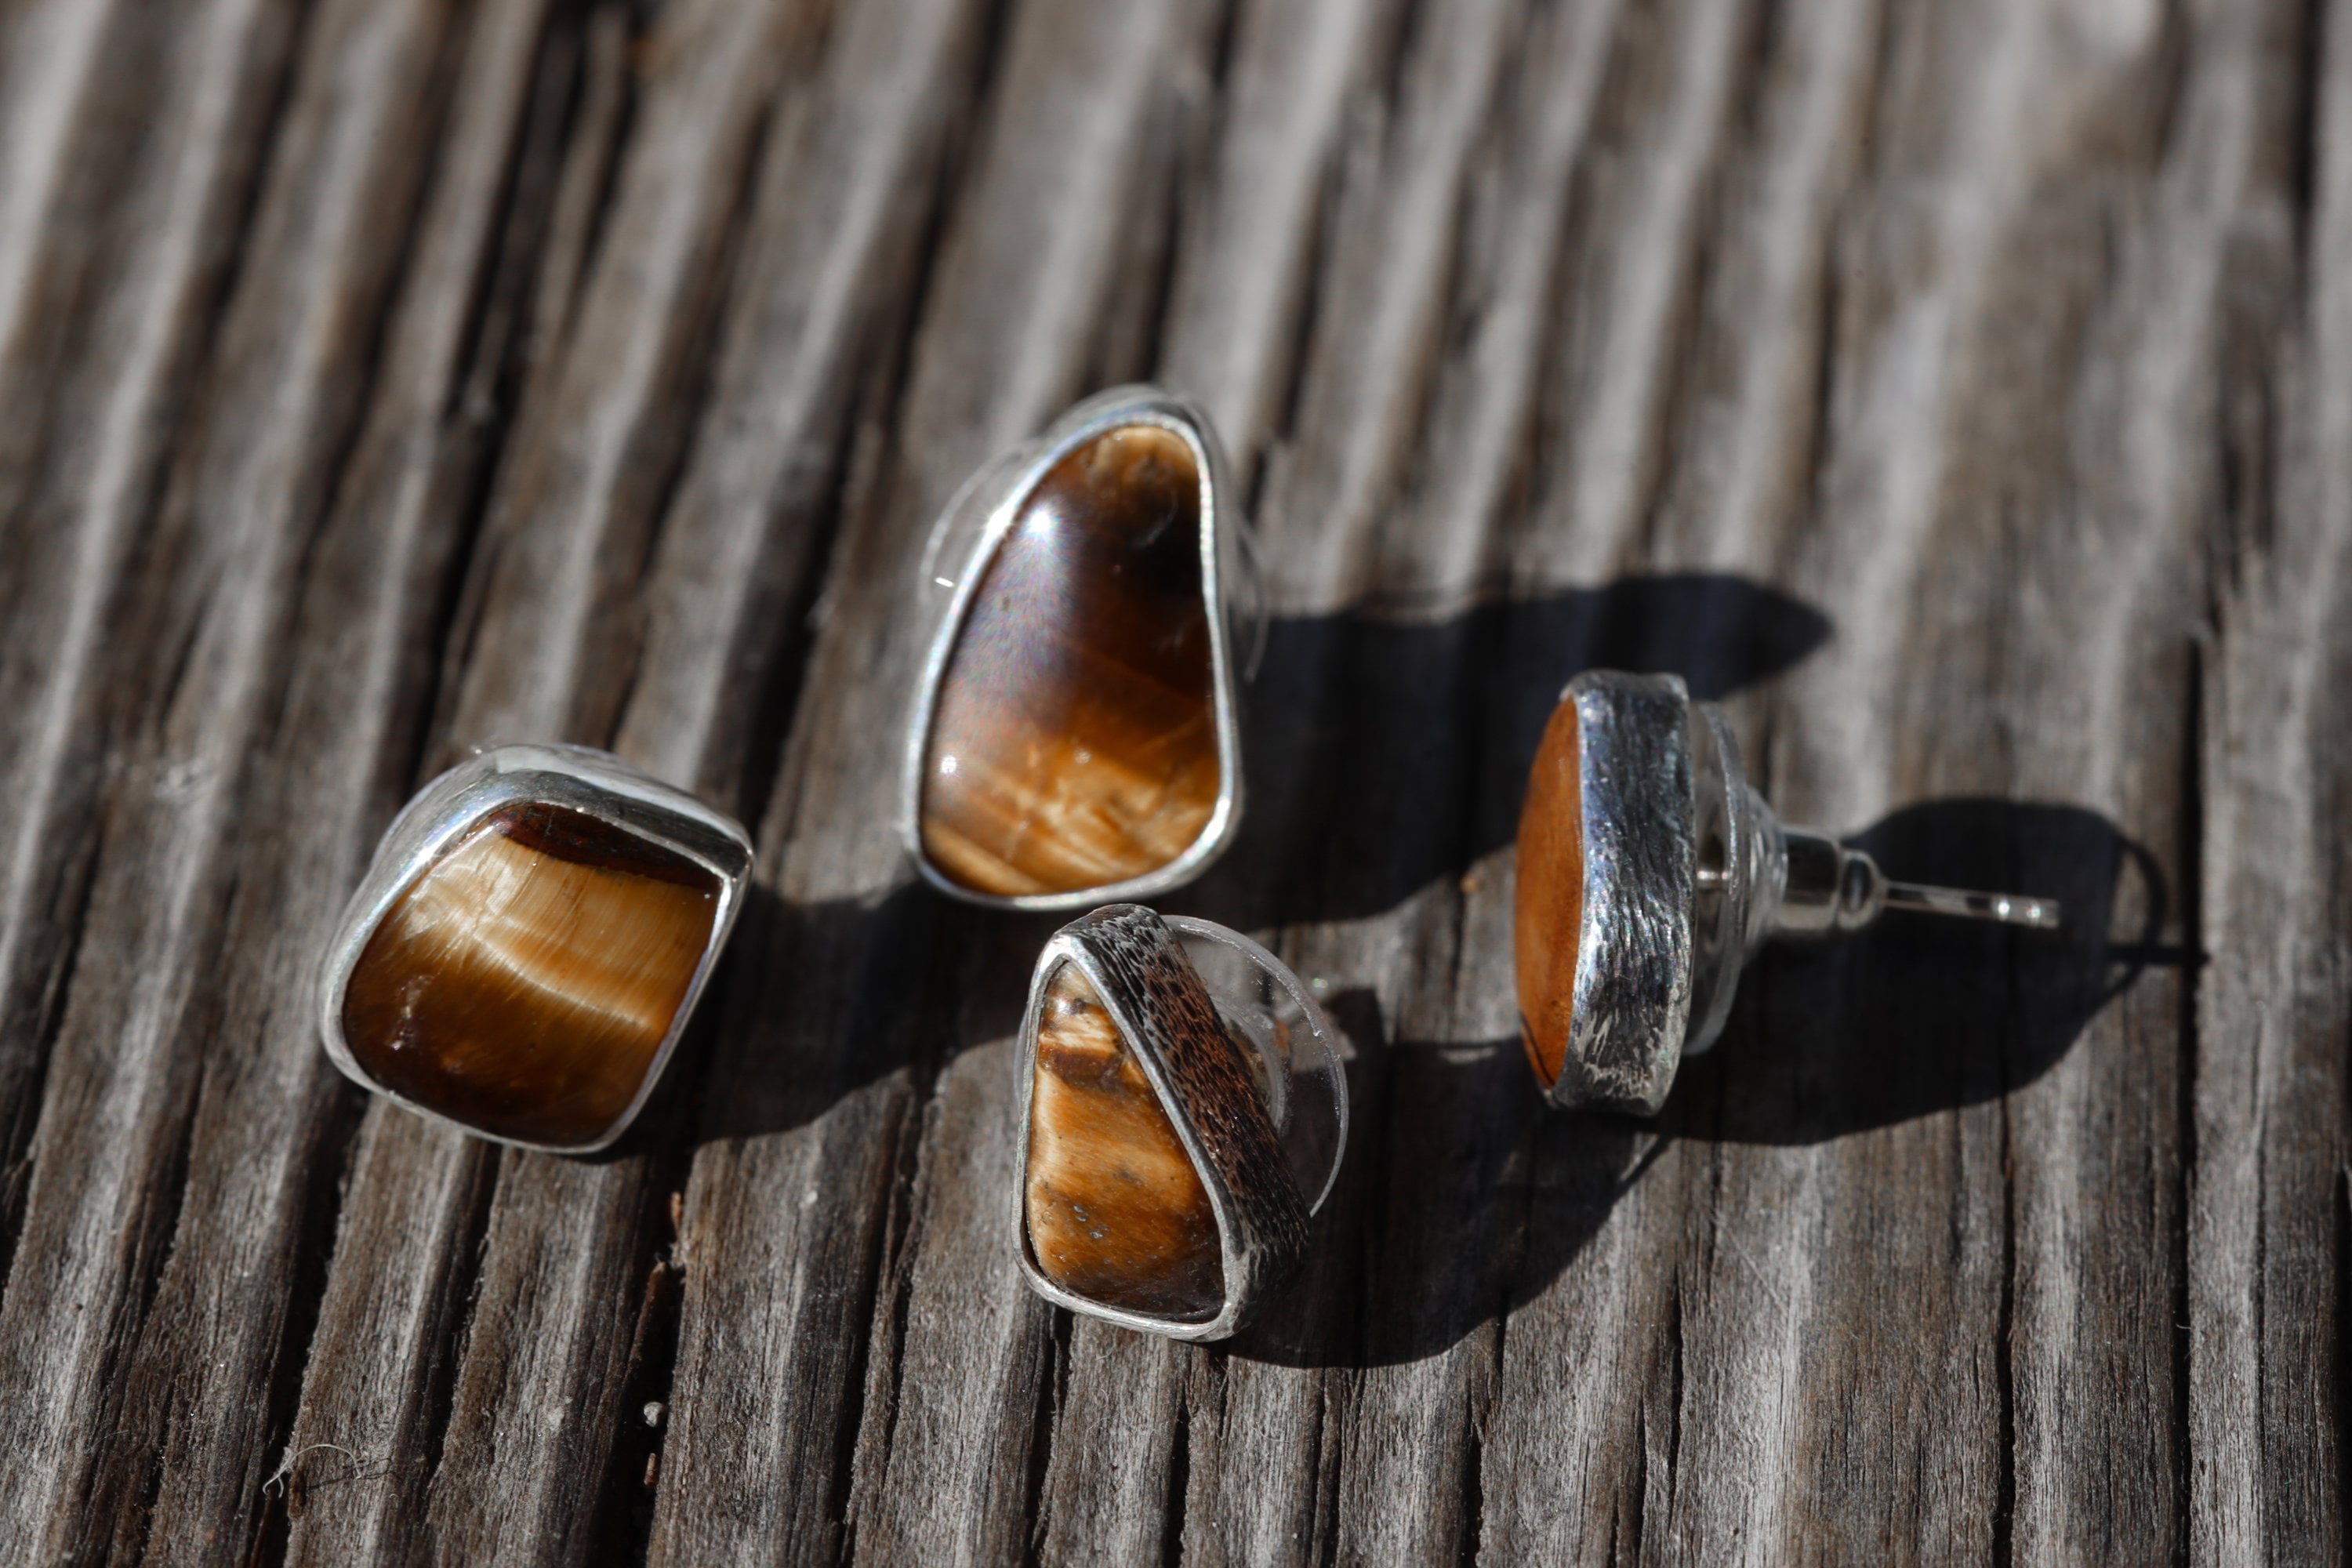 Tigers Eye Stud - organic shaped Pair- Sterling Silver - Polished Finish - Freeform Earring Studs